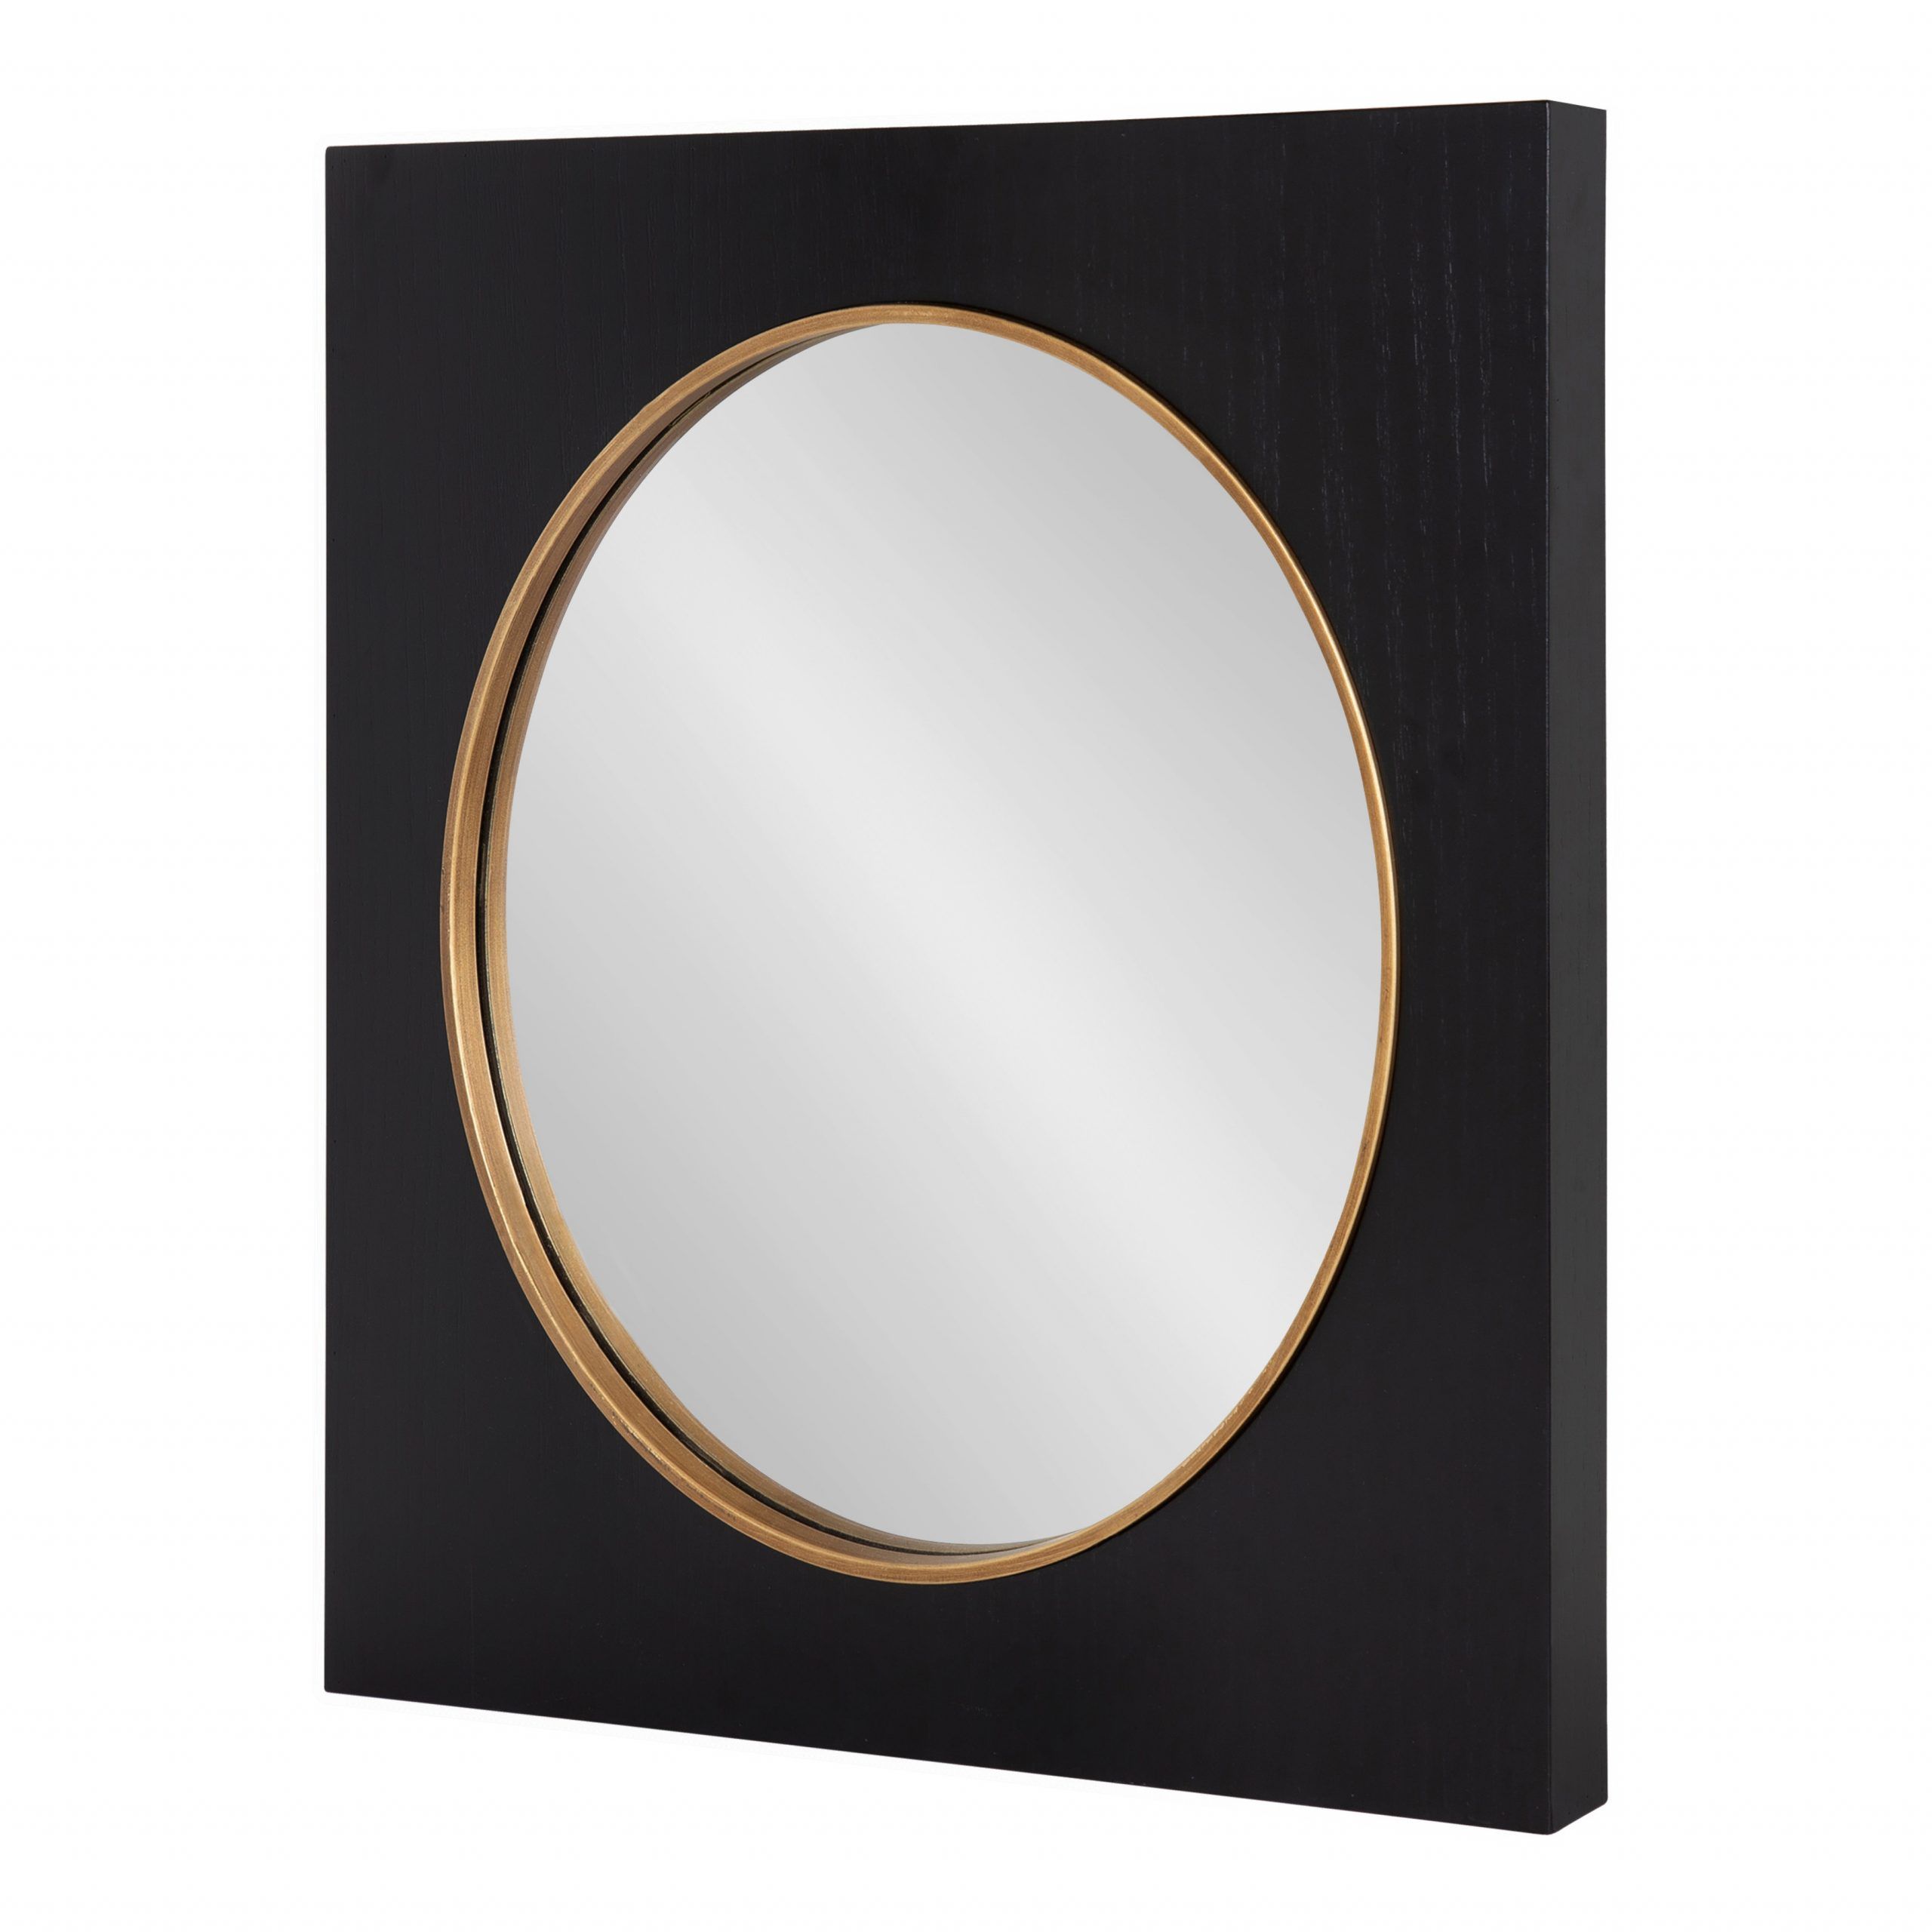 2019 Framed Matte Black Square Wall Mirrors Throughout Kate And Laurel Ringstead Square Wood Framed Accent Mirror, 23" X  (View 5 of 15)